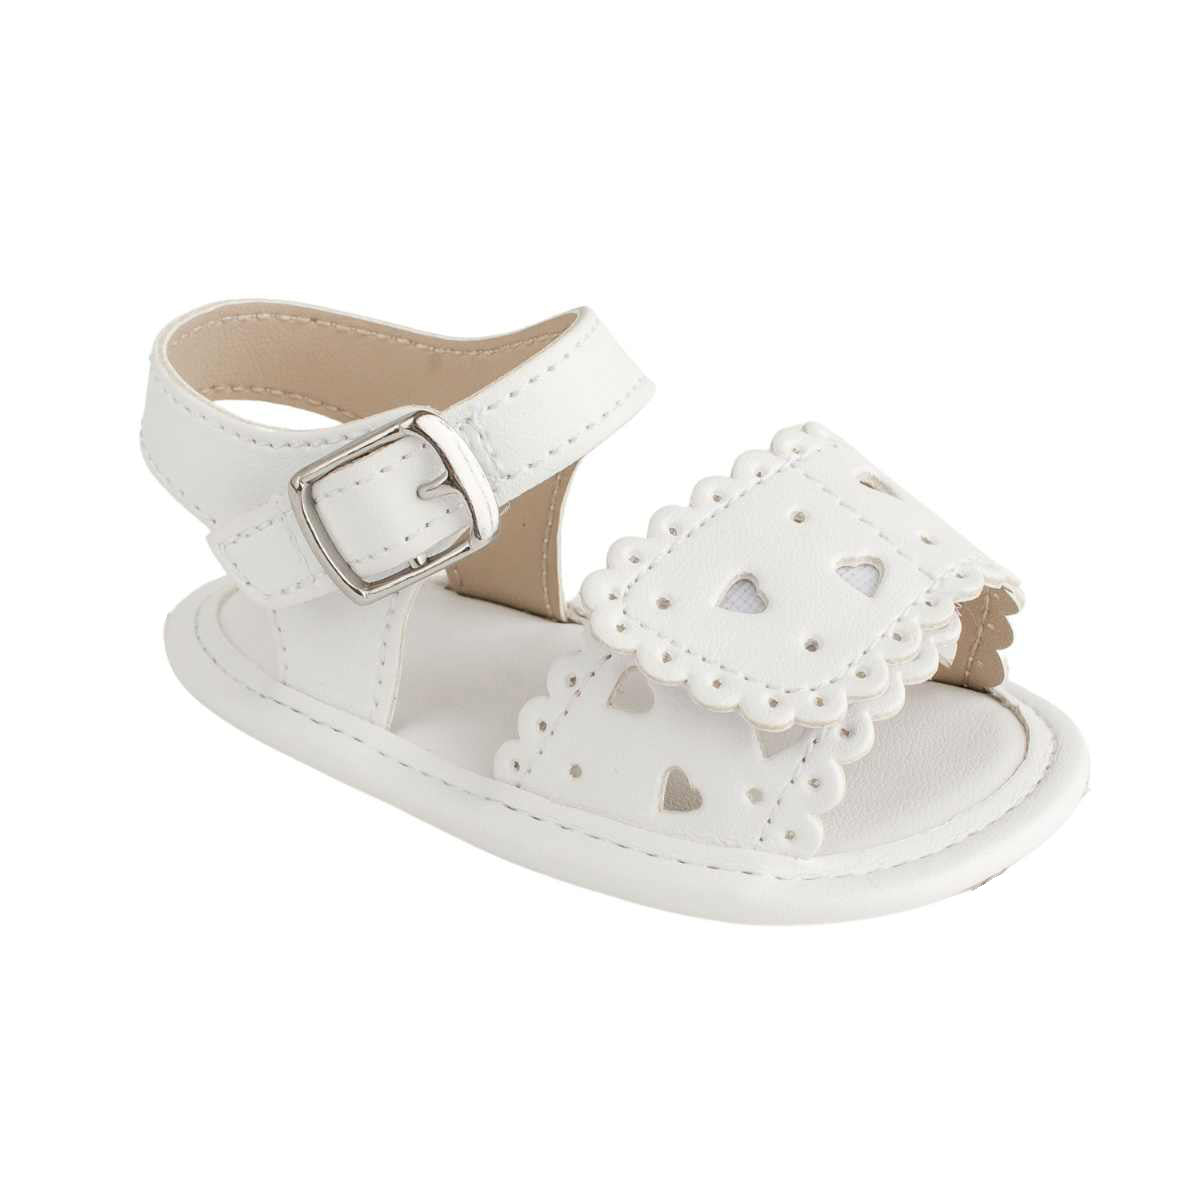 Baby Deer White Patricia Sandals with Heart Accents